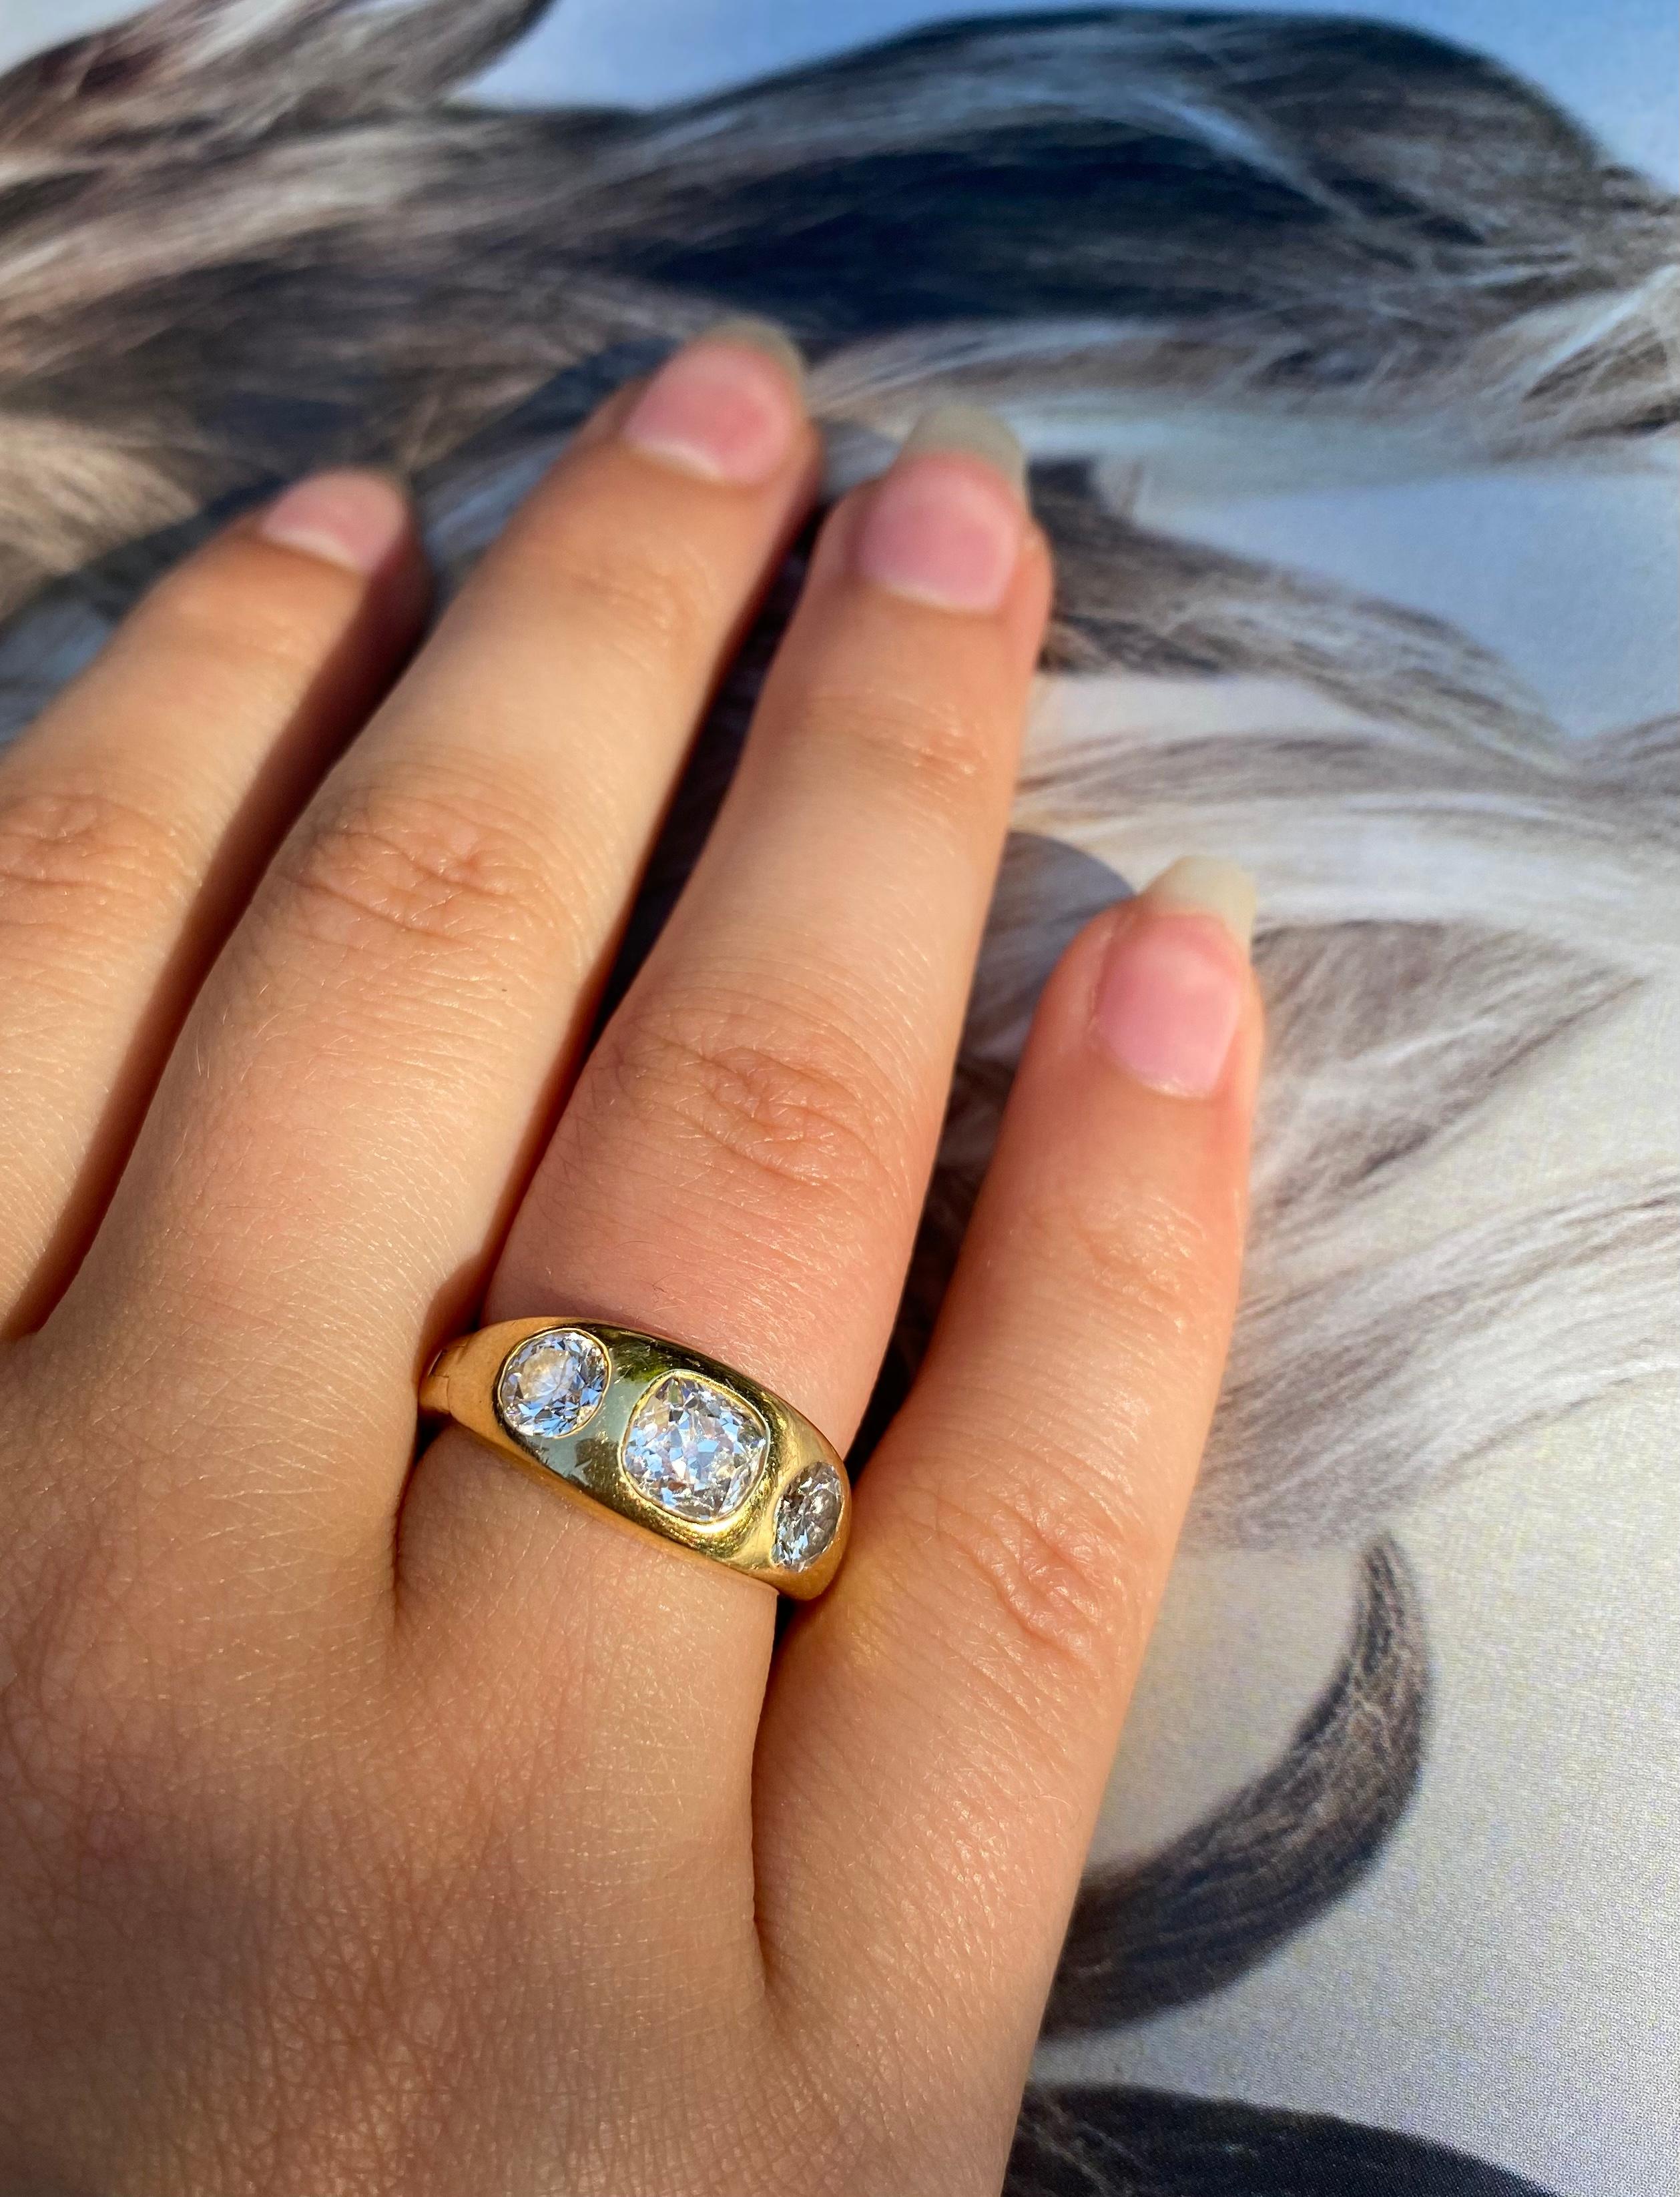 Rare double hinged expandable three stone diamond and 14K yellow gold Gypsy ring.
This ring effortlessly expands from a size 5 US to size 7.75 US with a clever mechanism at the back of the band and the double hinged design at the sides. This allows